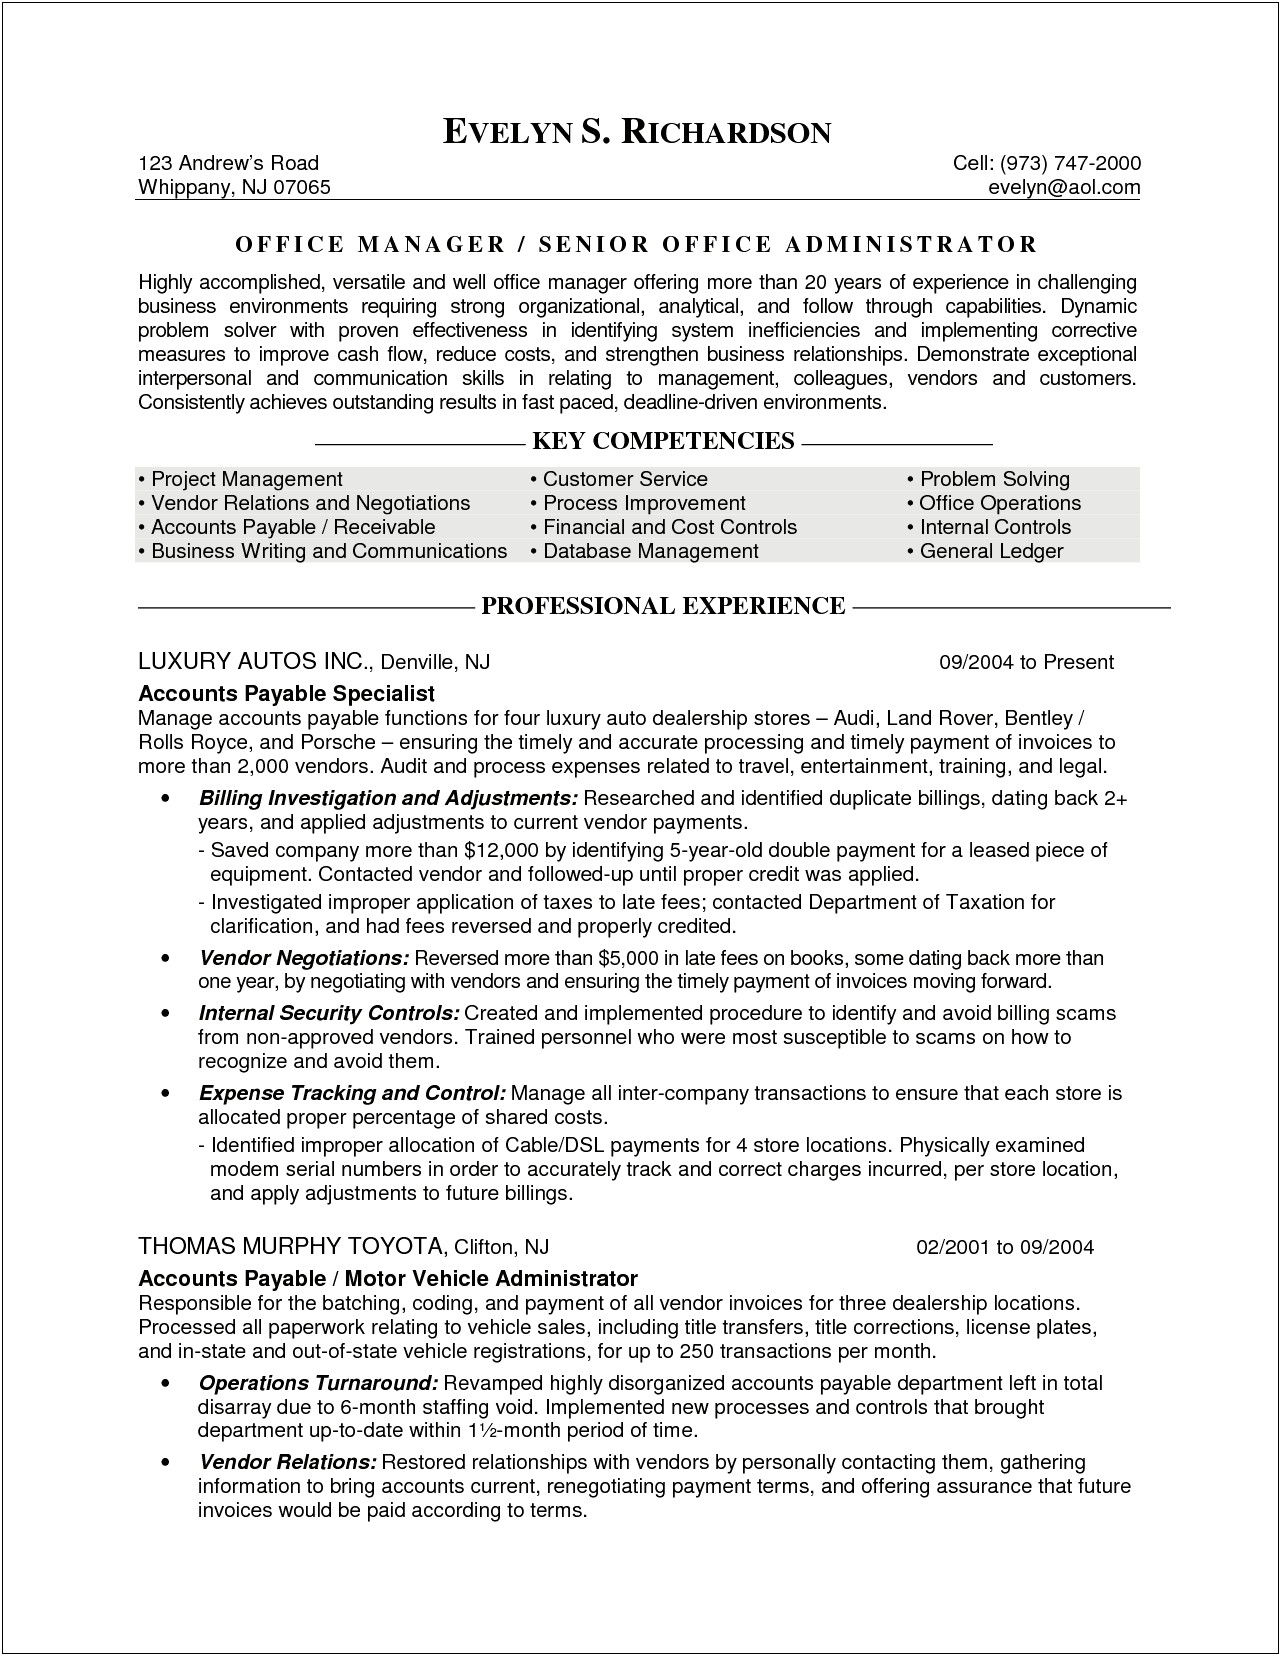 Resume Objective For Office Nurse